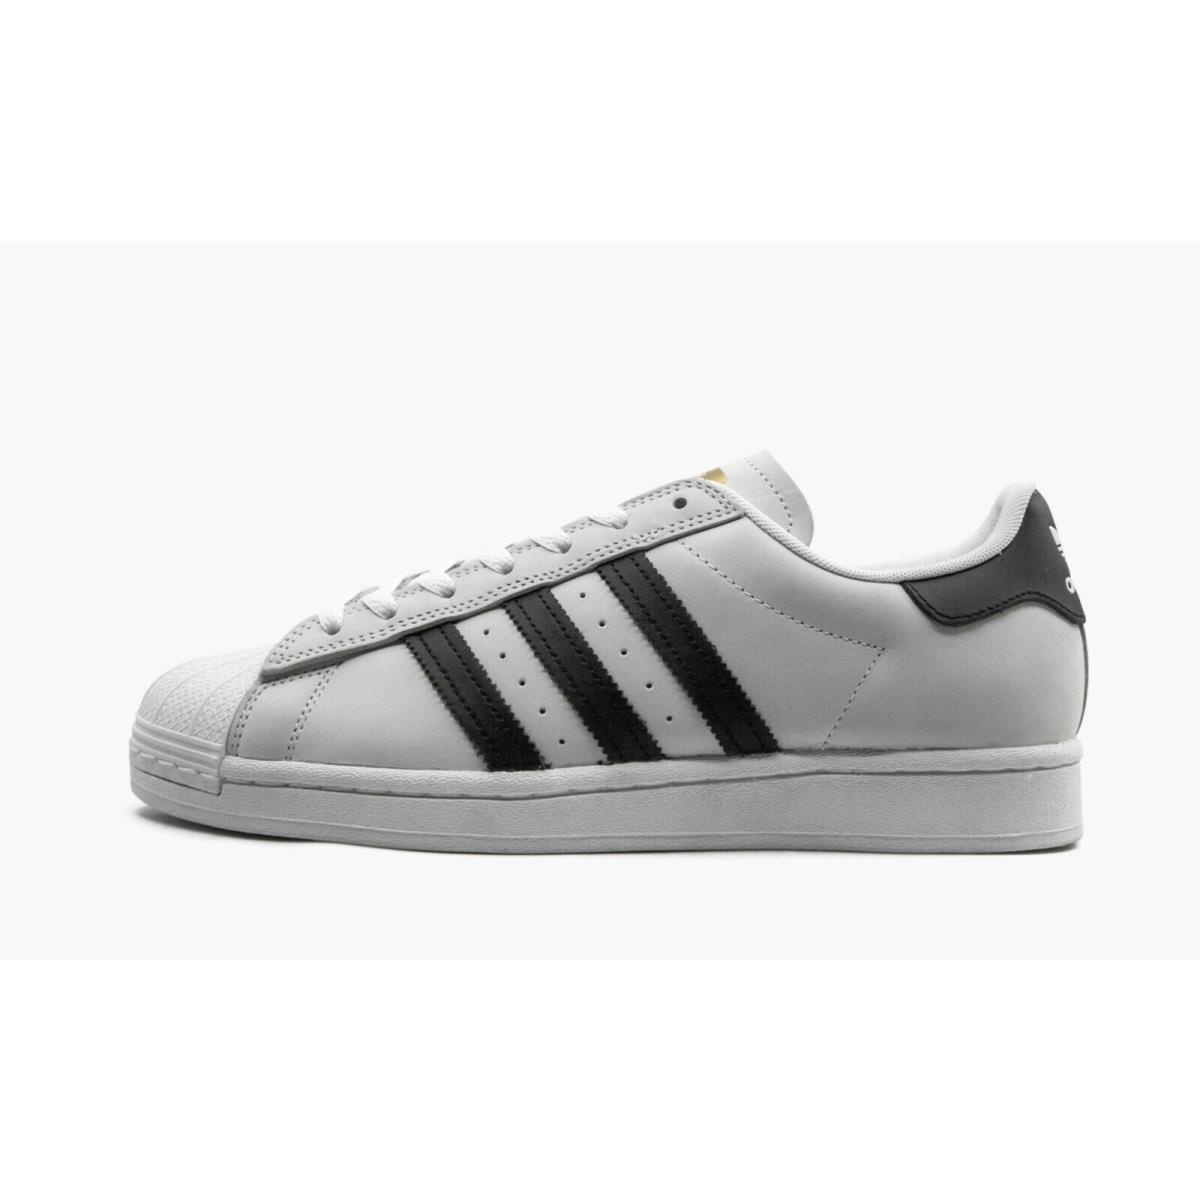 Men`s Adidas Superstar Adv FV0322 Casual Sneakers Classic Shoes